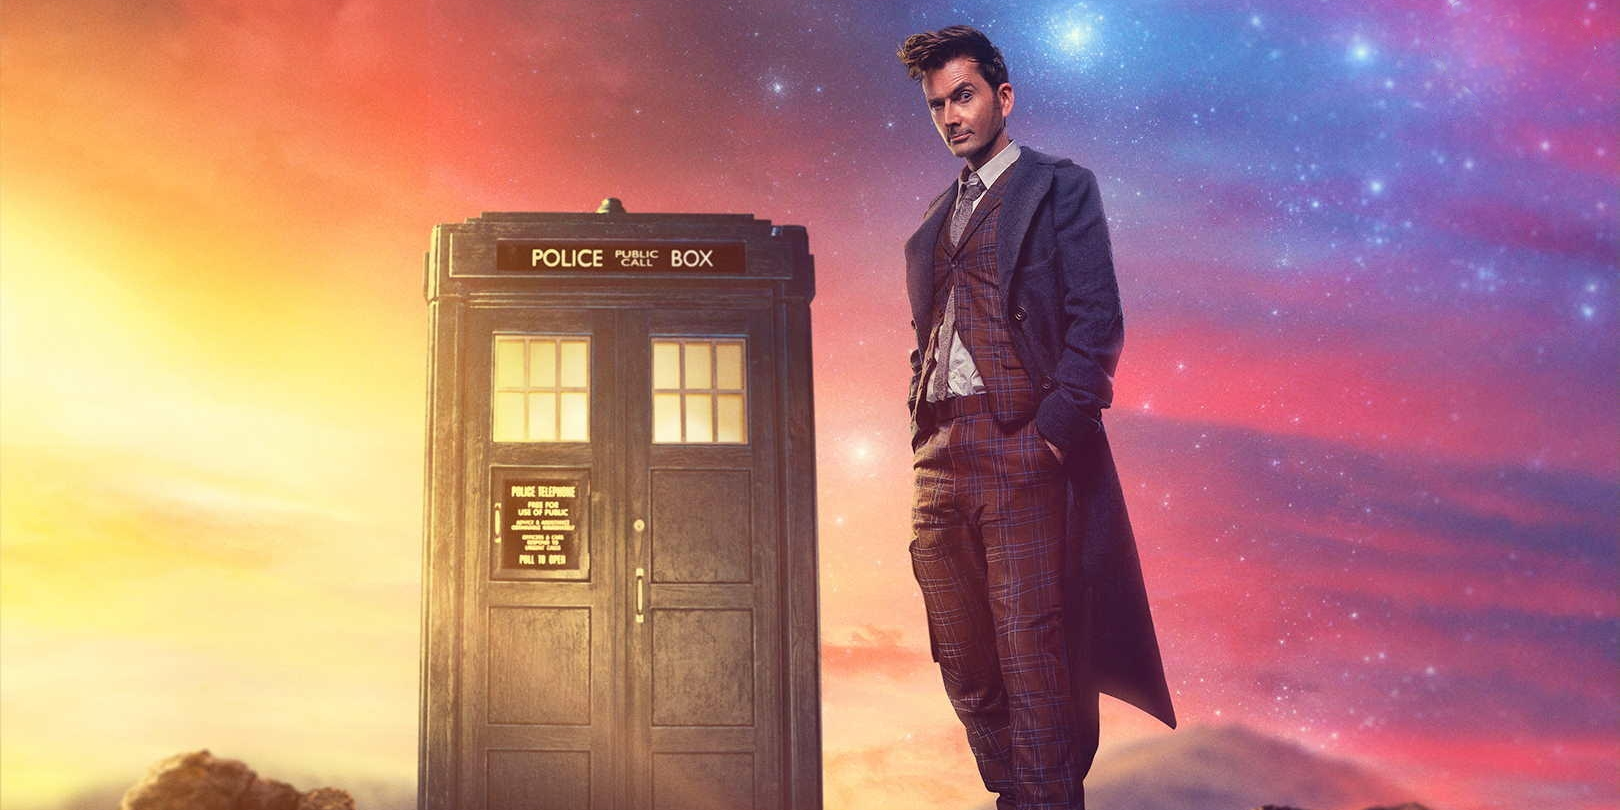 David Tennant reprises his role in Doctor Who